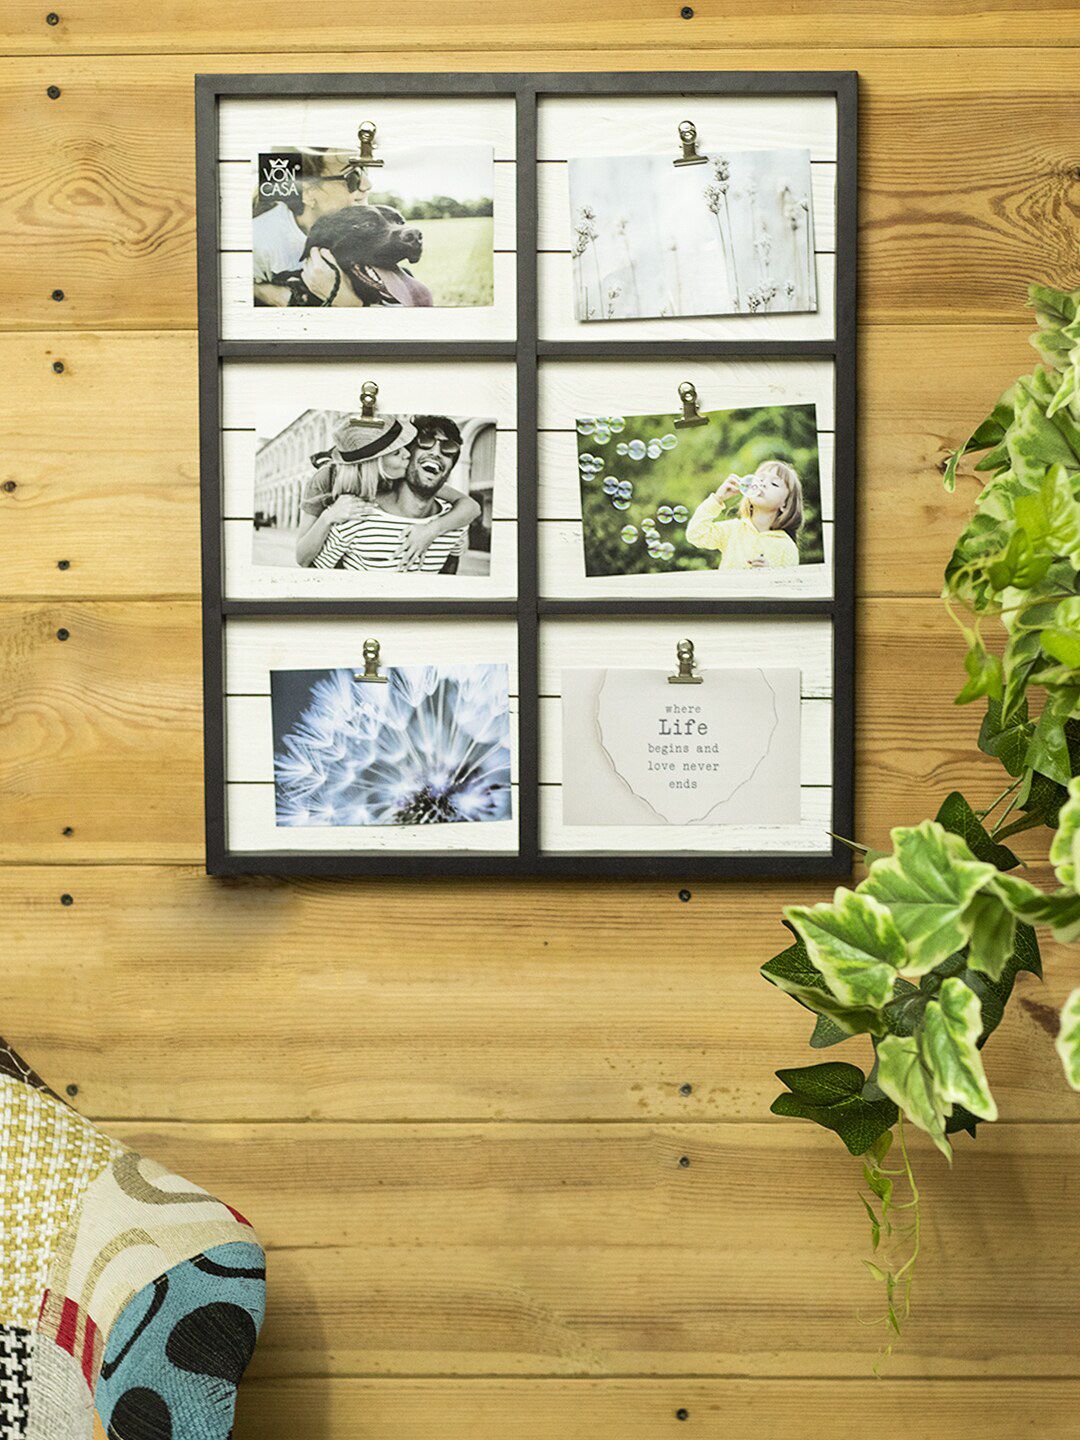 MARKET99 Black Solid Wall Photo Frame Price in India